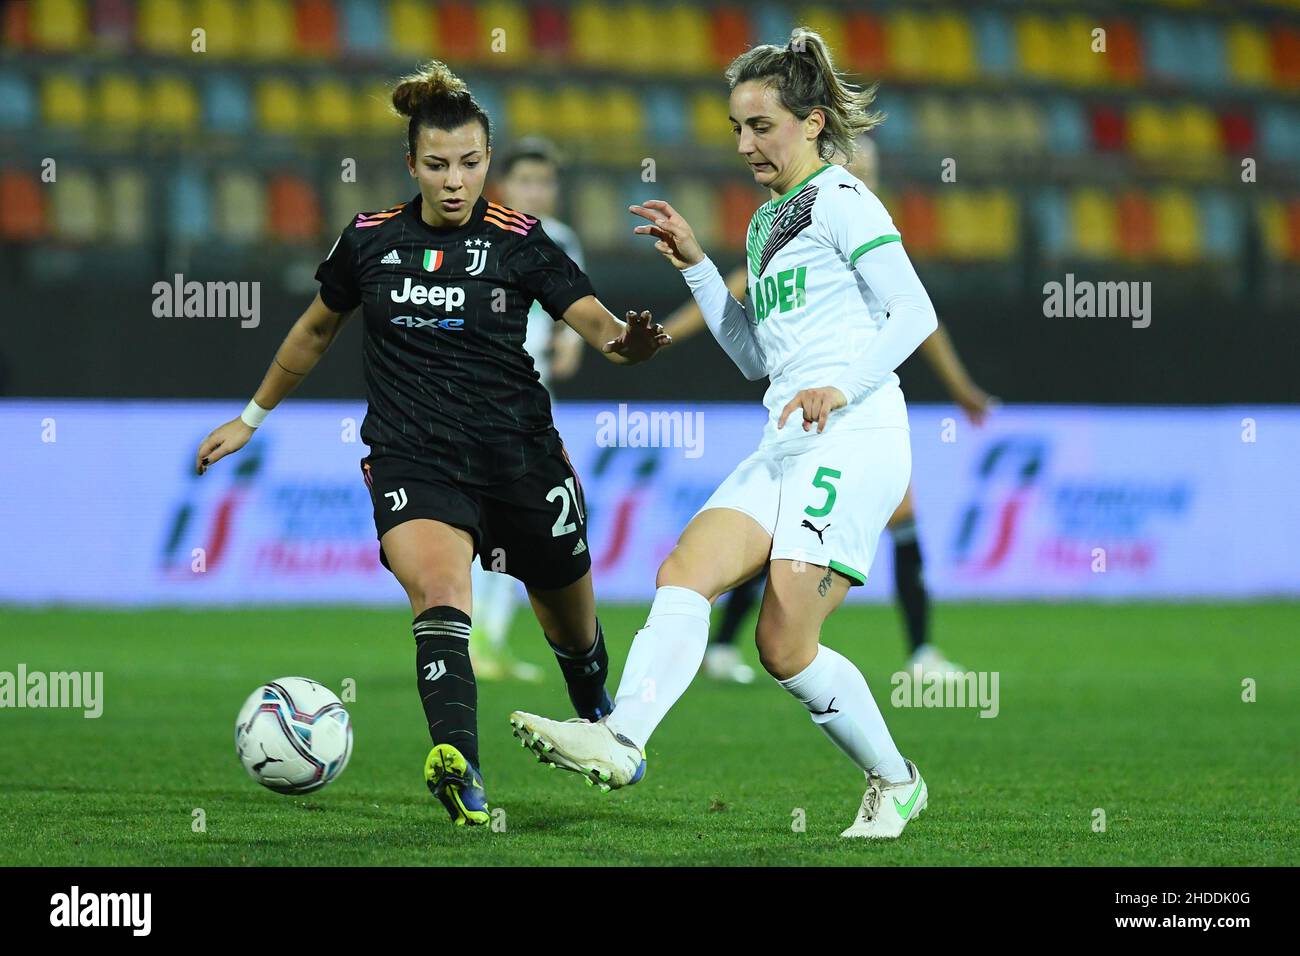 Calcio Femminile High Resolution Stock Photography and Images - Alamy